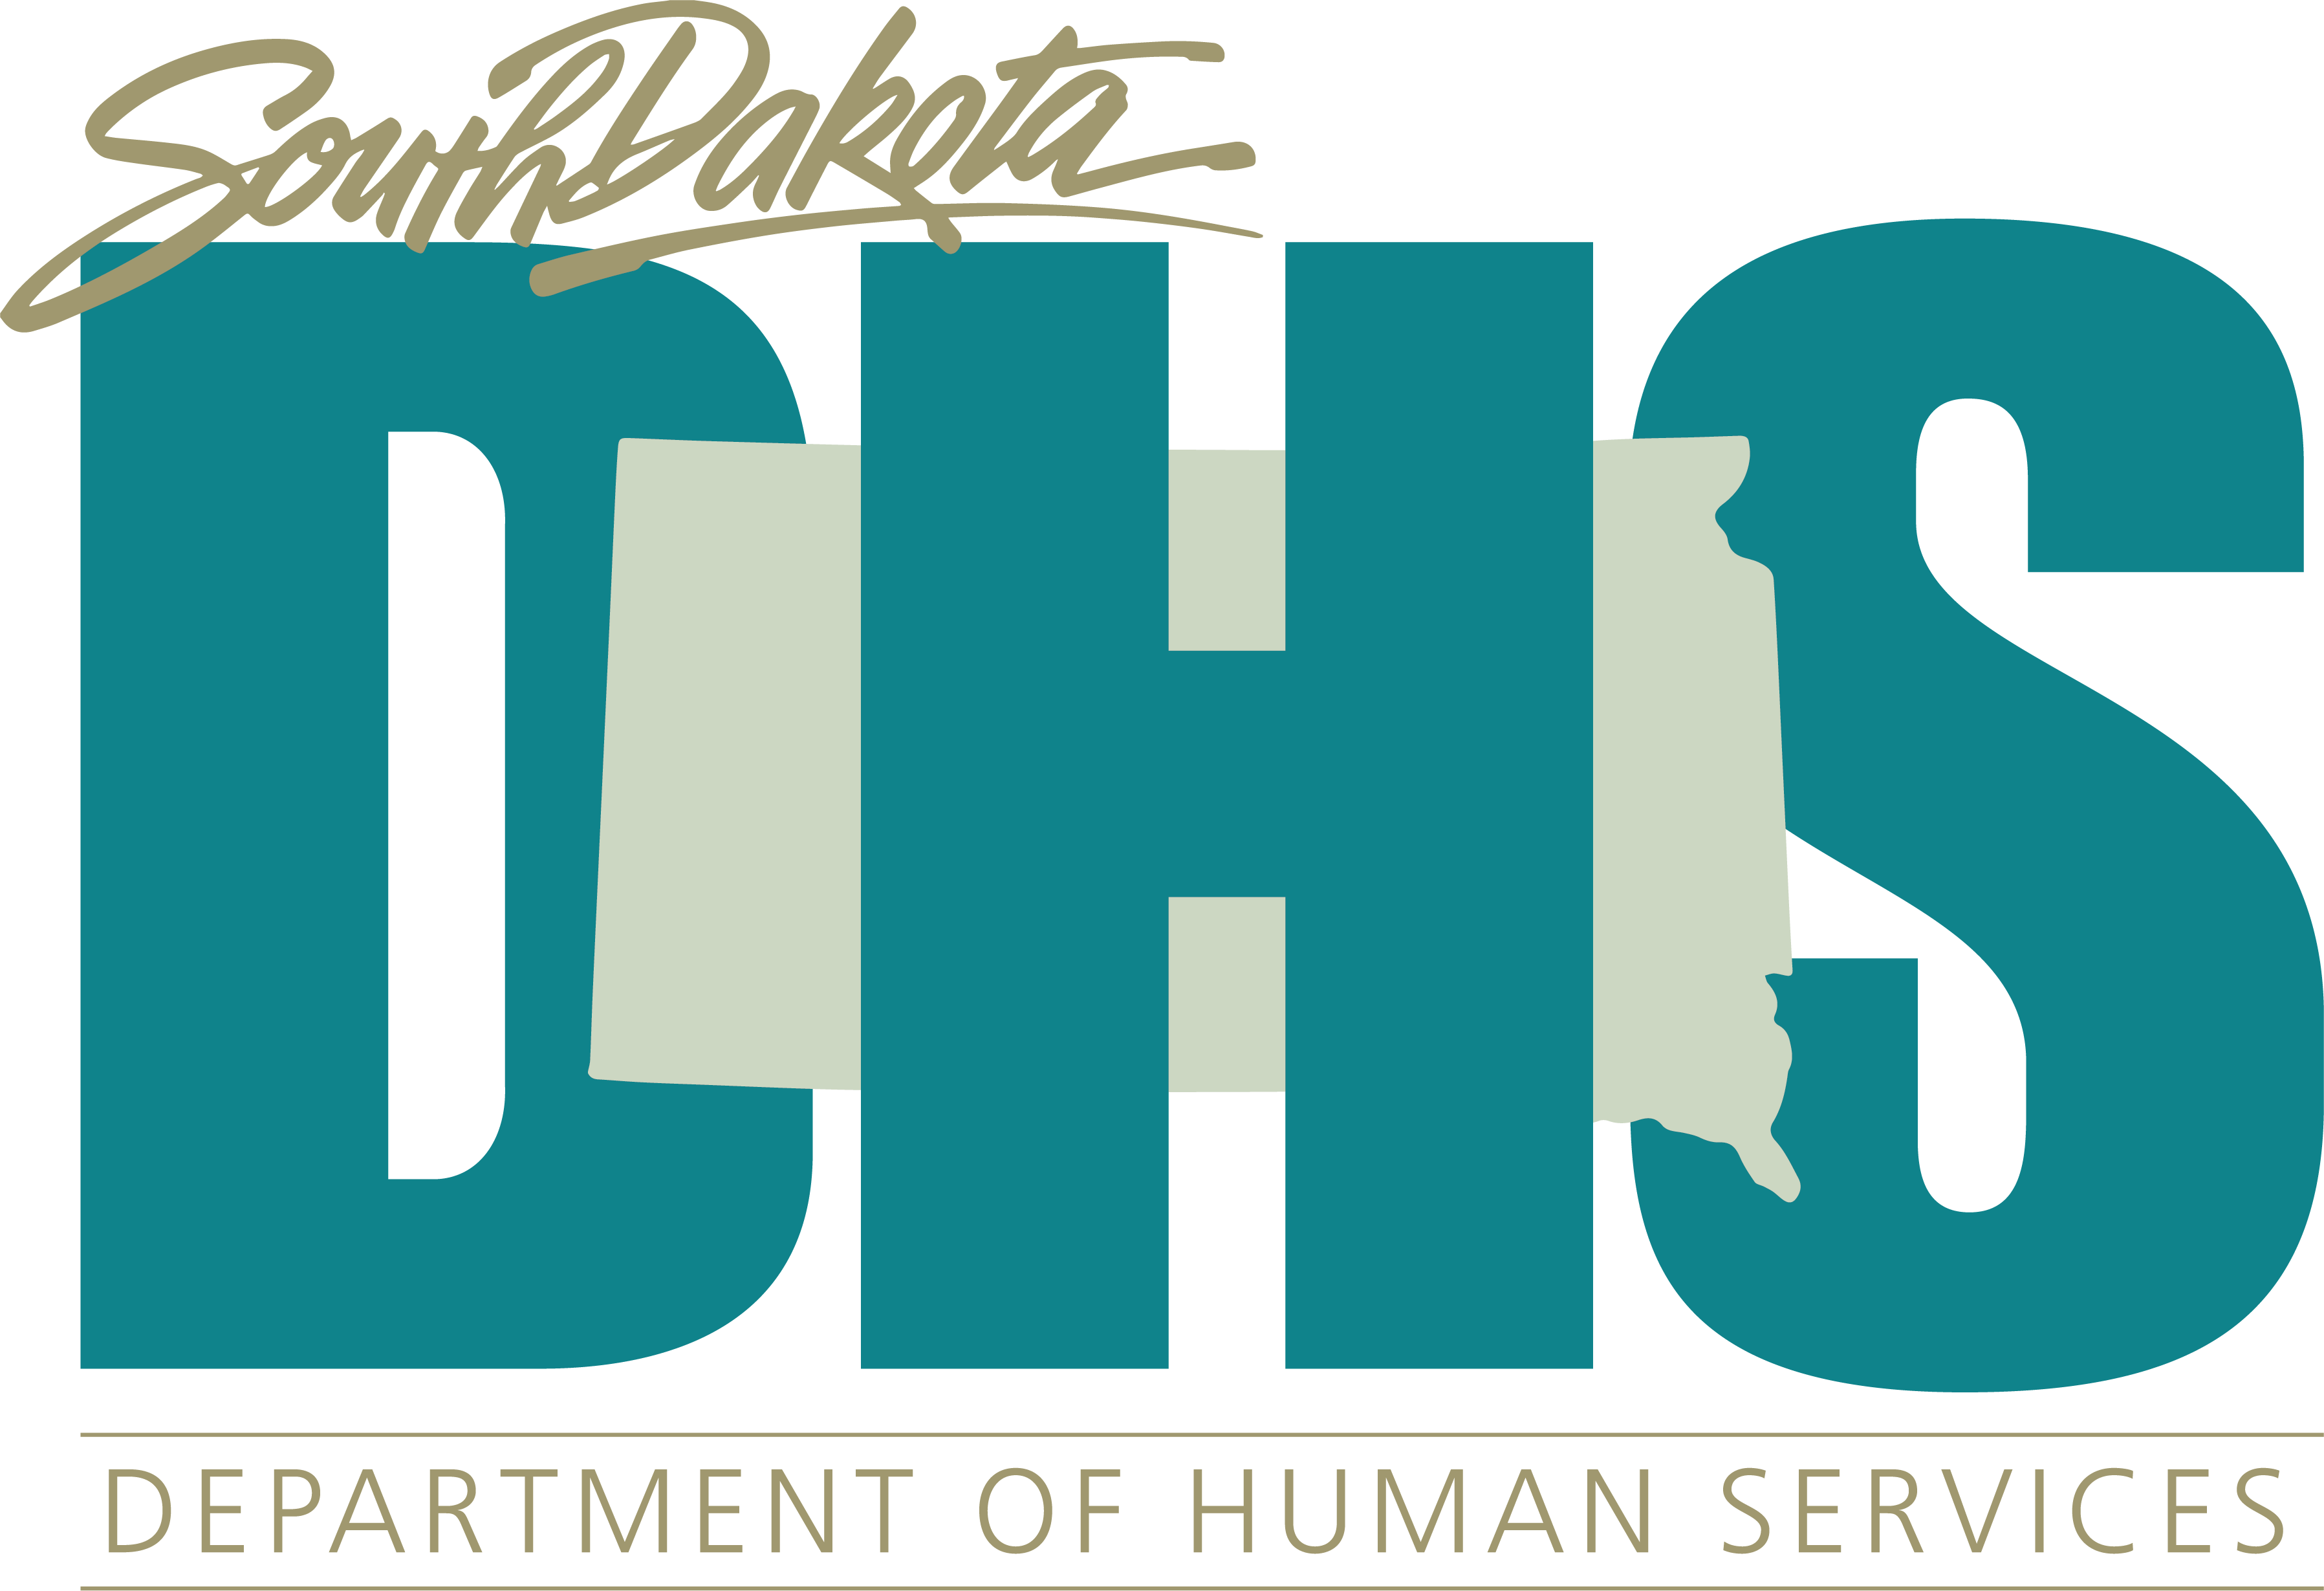 SD Department of Human Services Division of Long Term Services and Supports